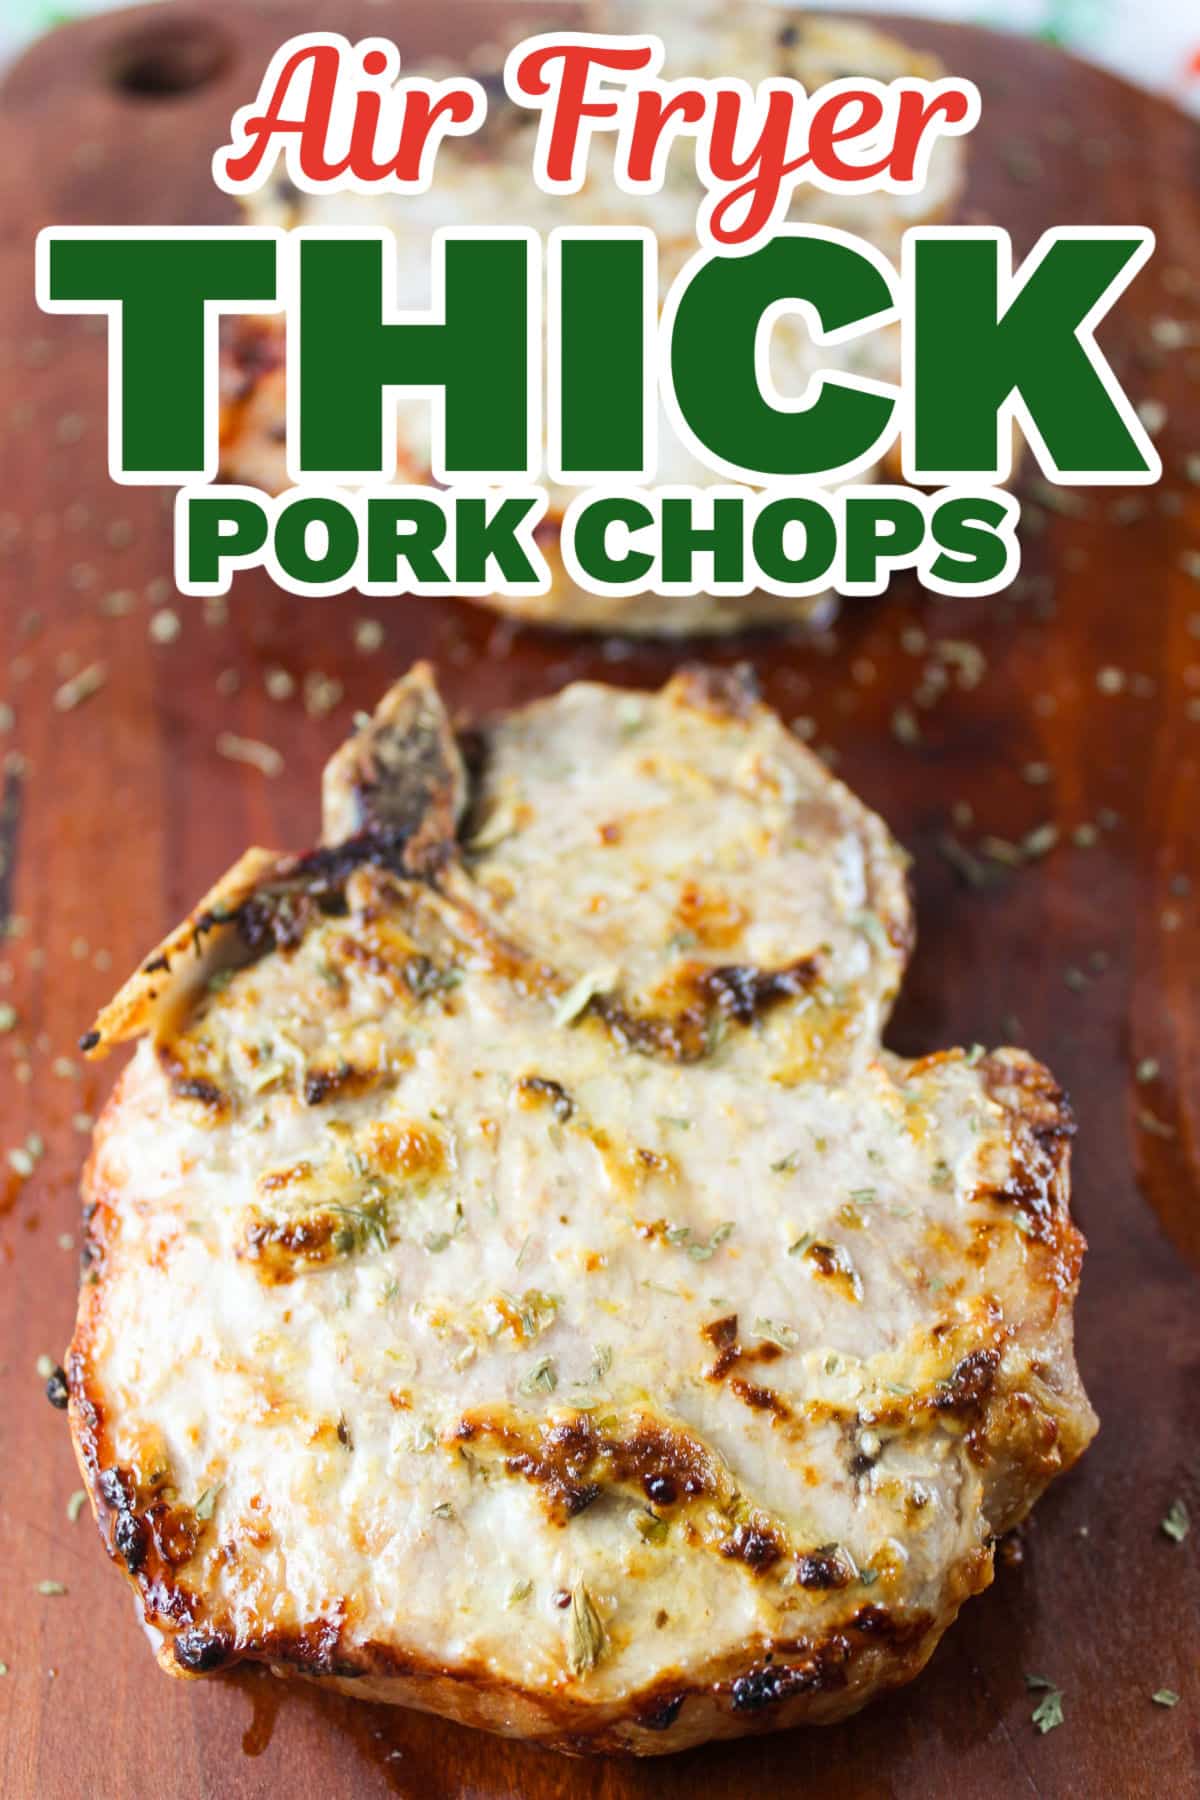 Thick Cut Pork Chops are juicy and full of flavor when you make them in the air fryer! And you can go from fridge to plate in just 20 minutes!  via @foodhussy